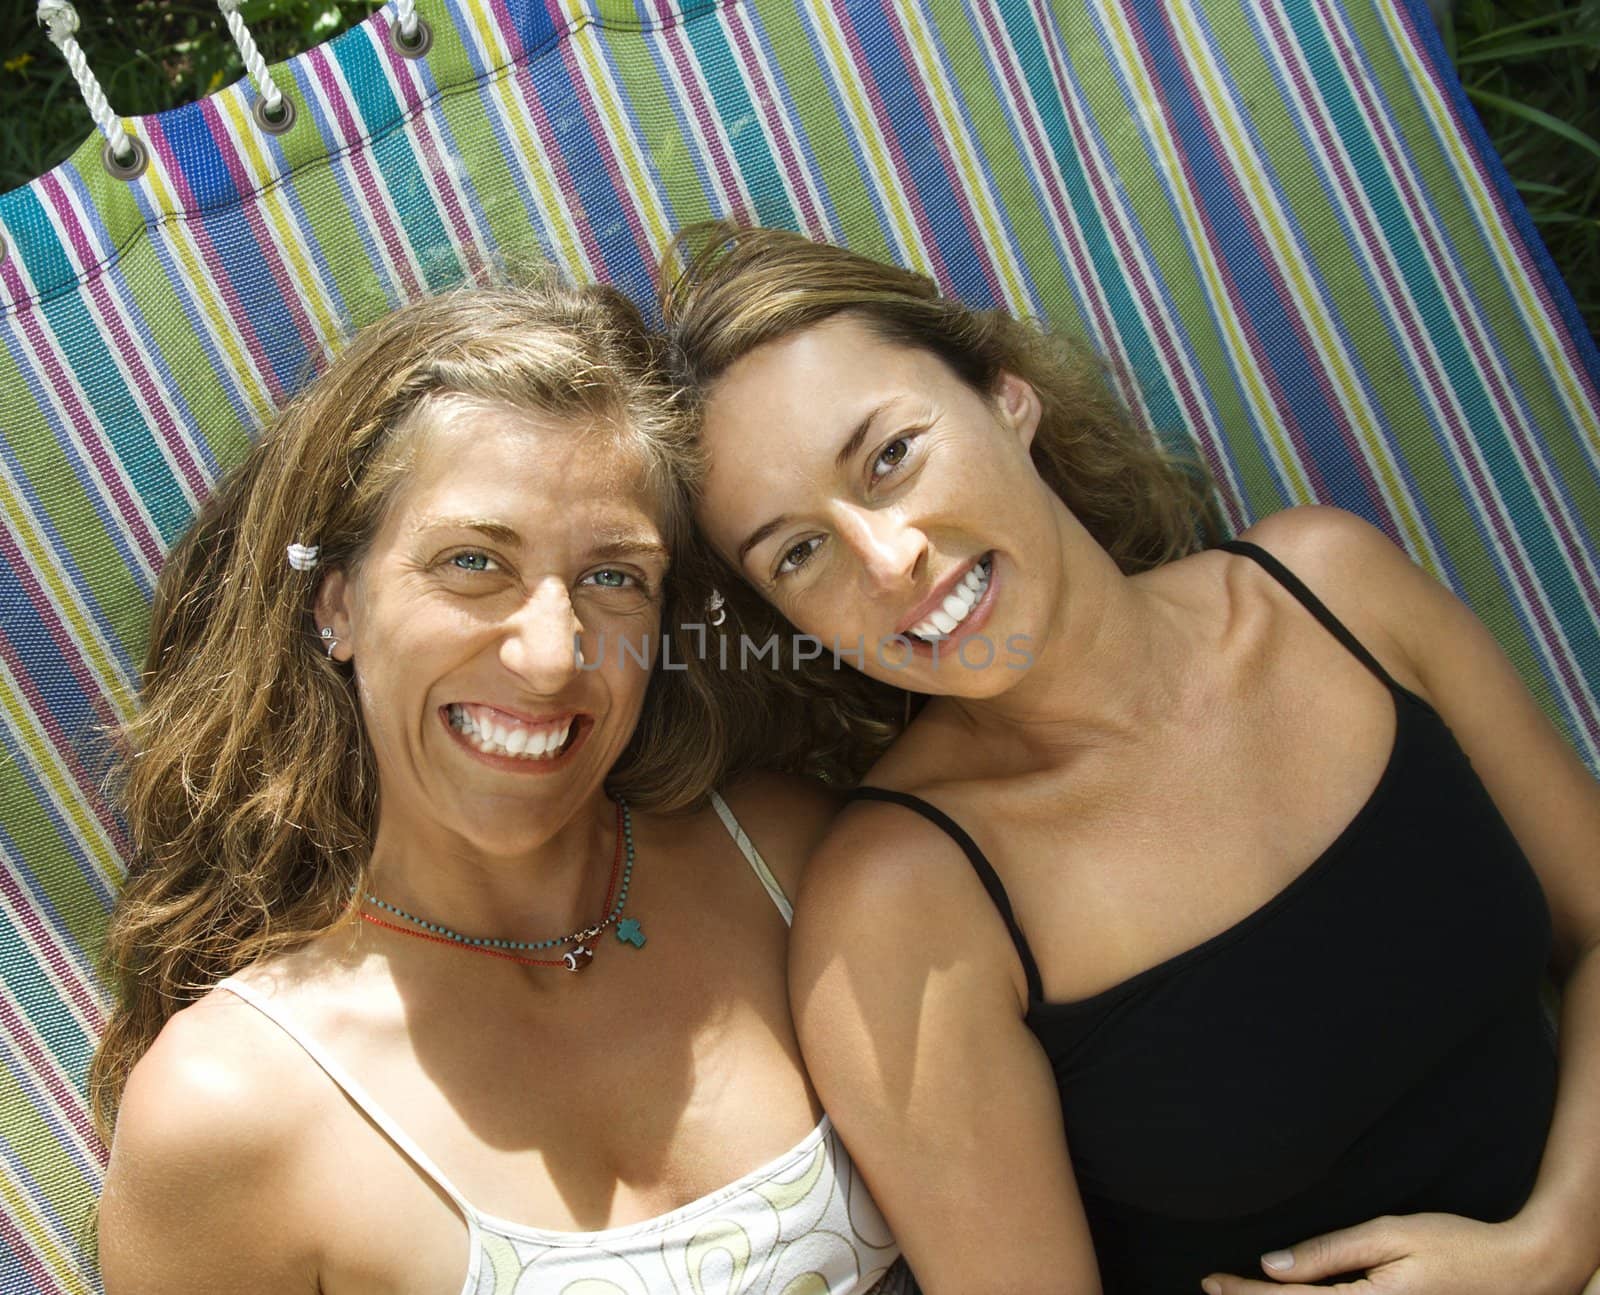 Caucasian mid-adult women lying in hammock and smiling.